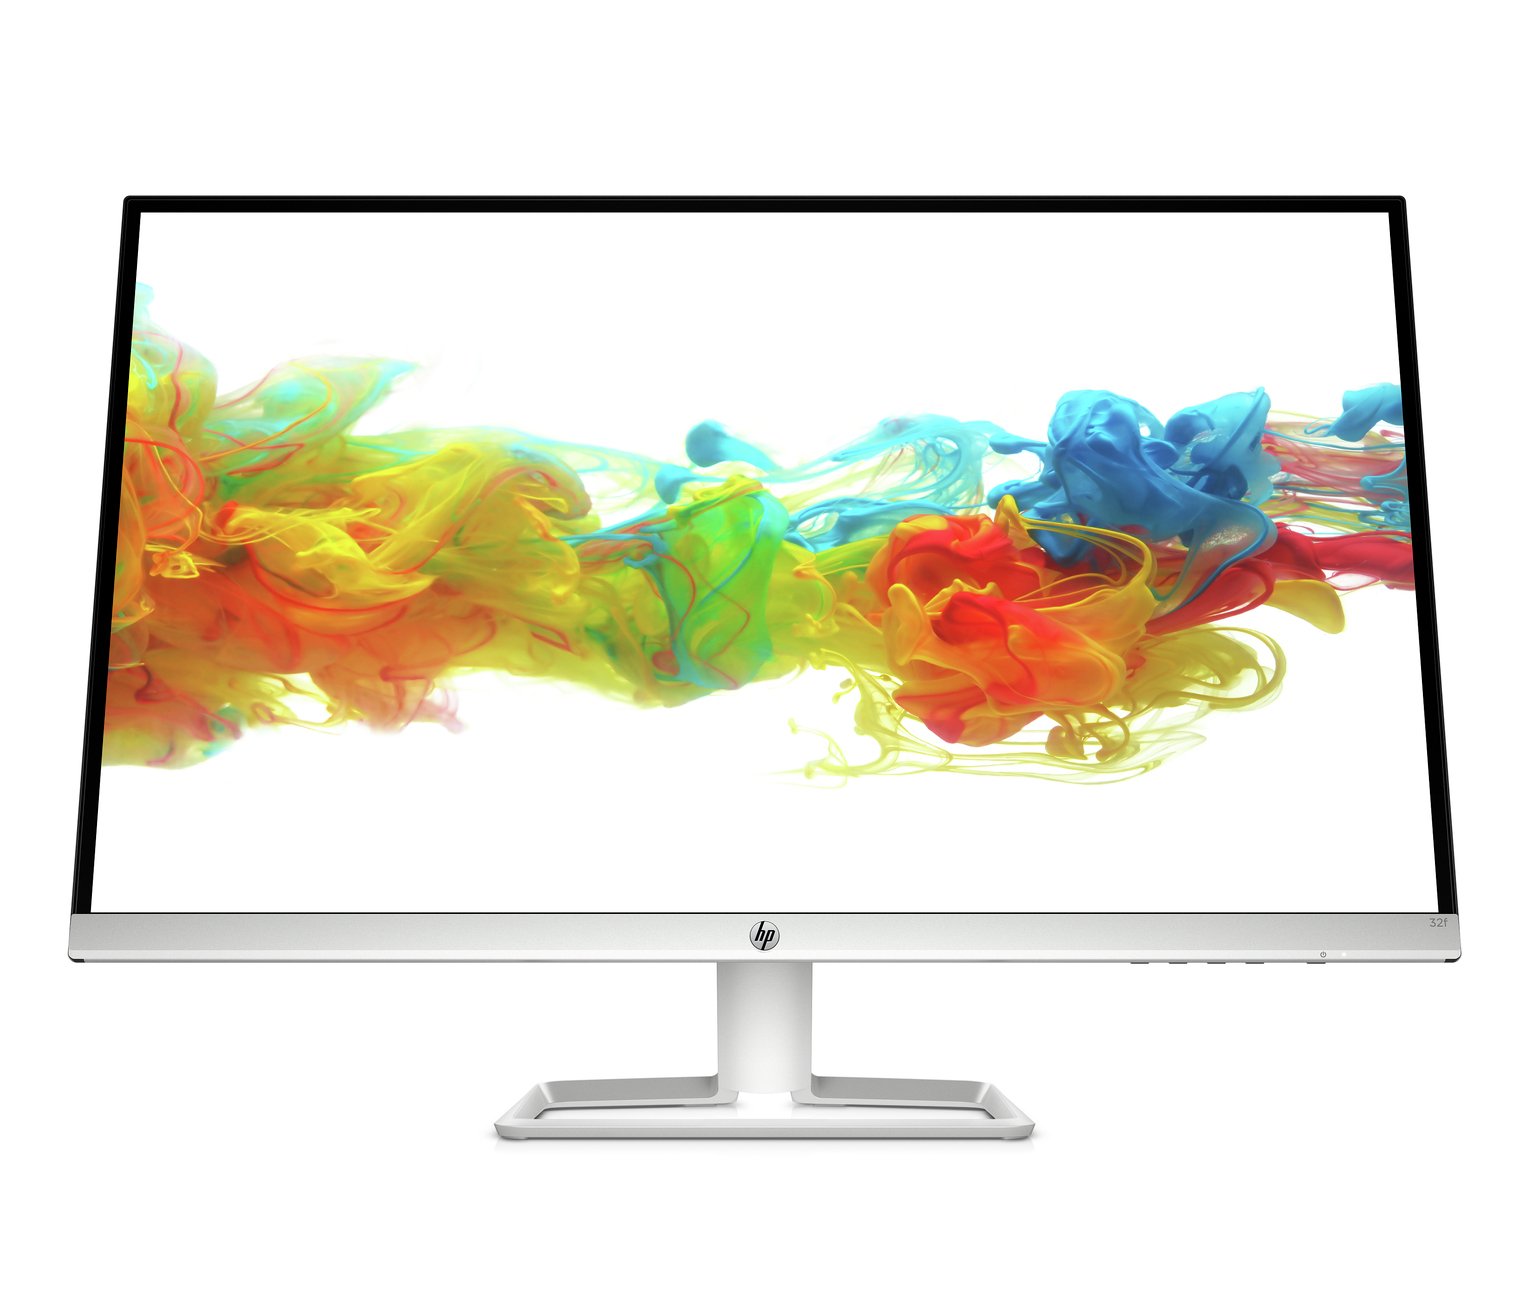 HP 32F 31.5in FHD IPS Ultra-Slim Monitor Review